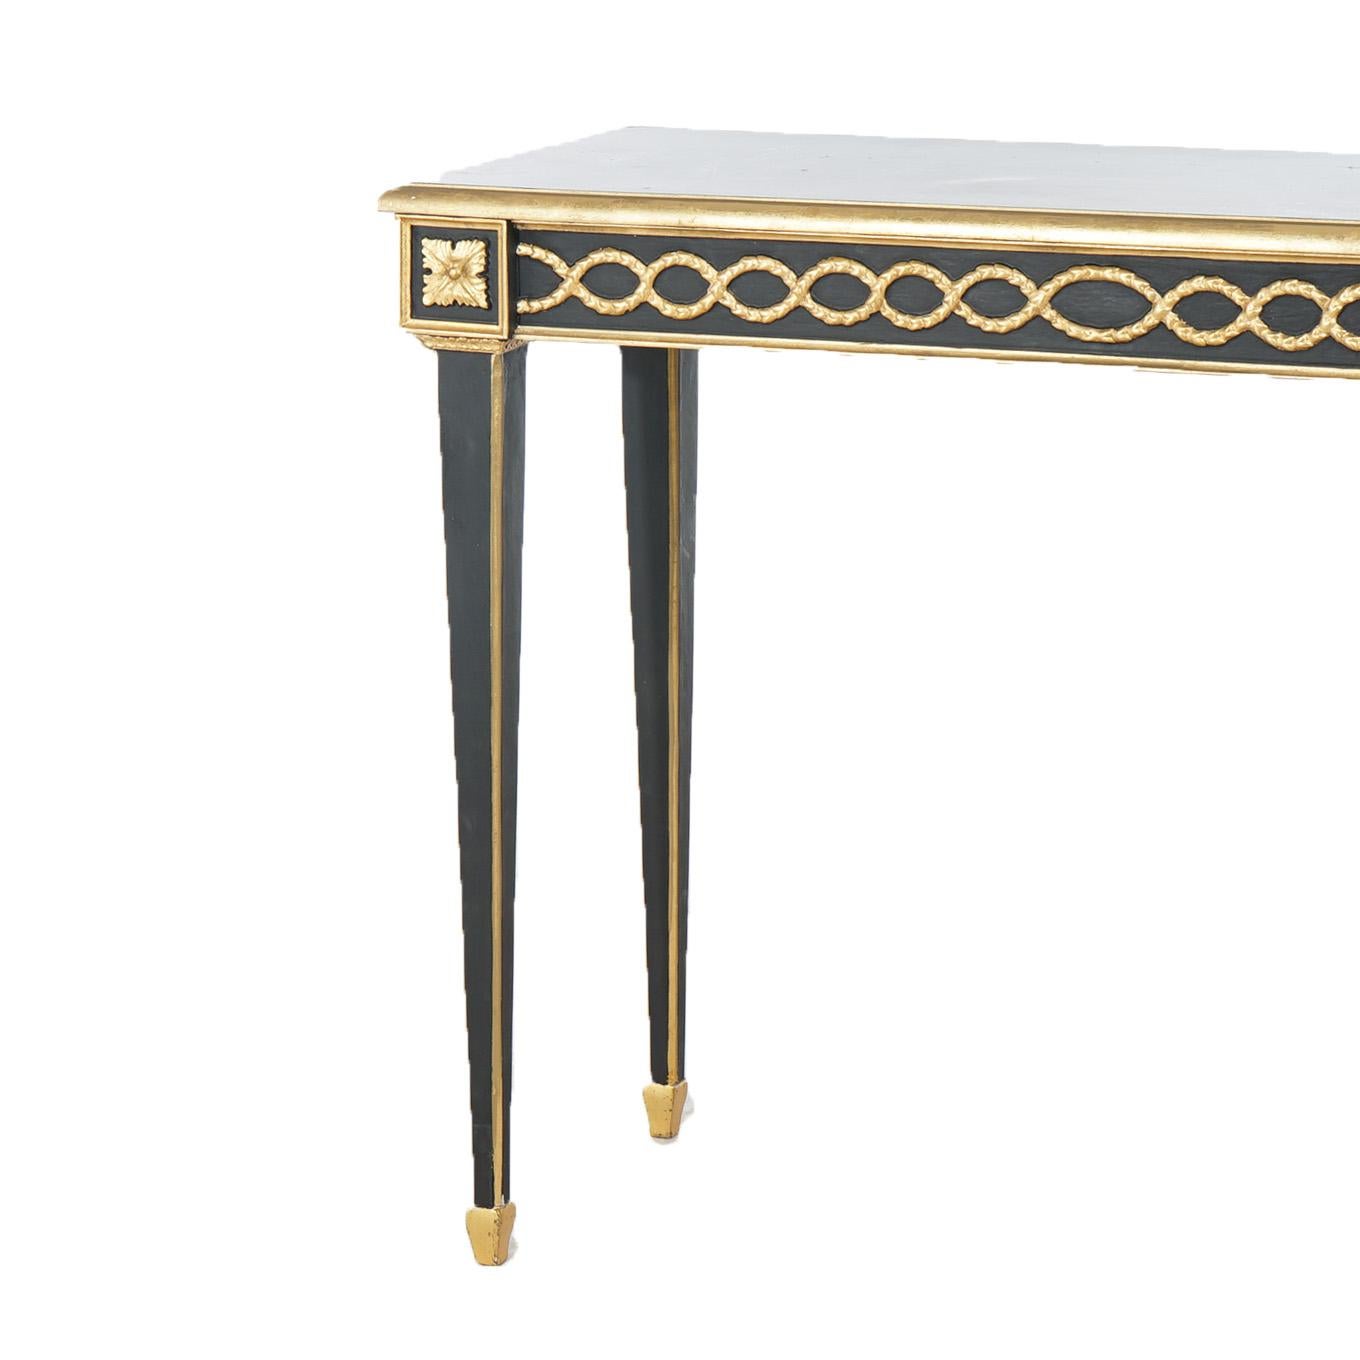 Wood French Empire Style Ebonized & Gilt Console Table 20thC For Sale